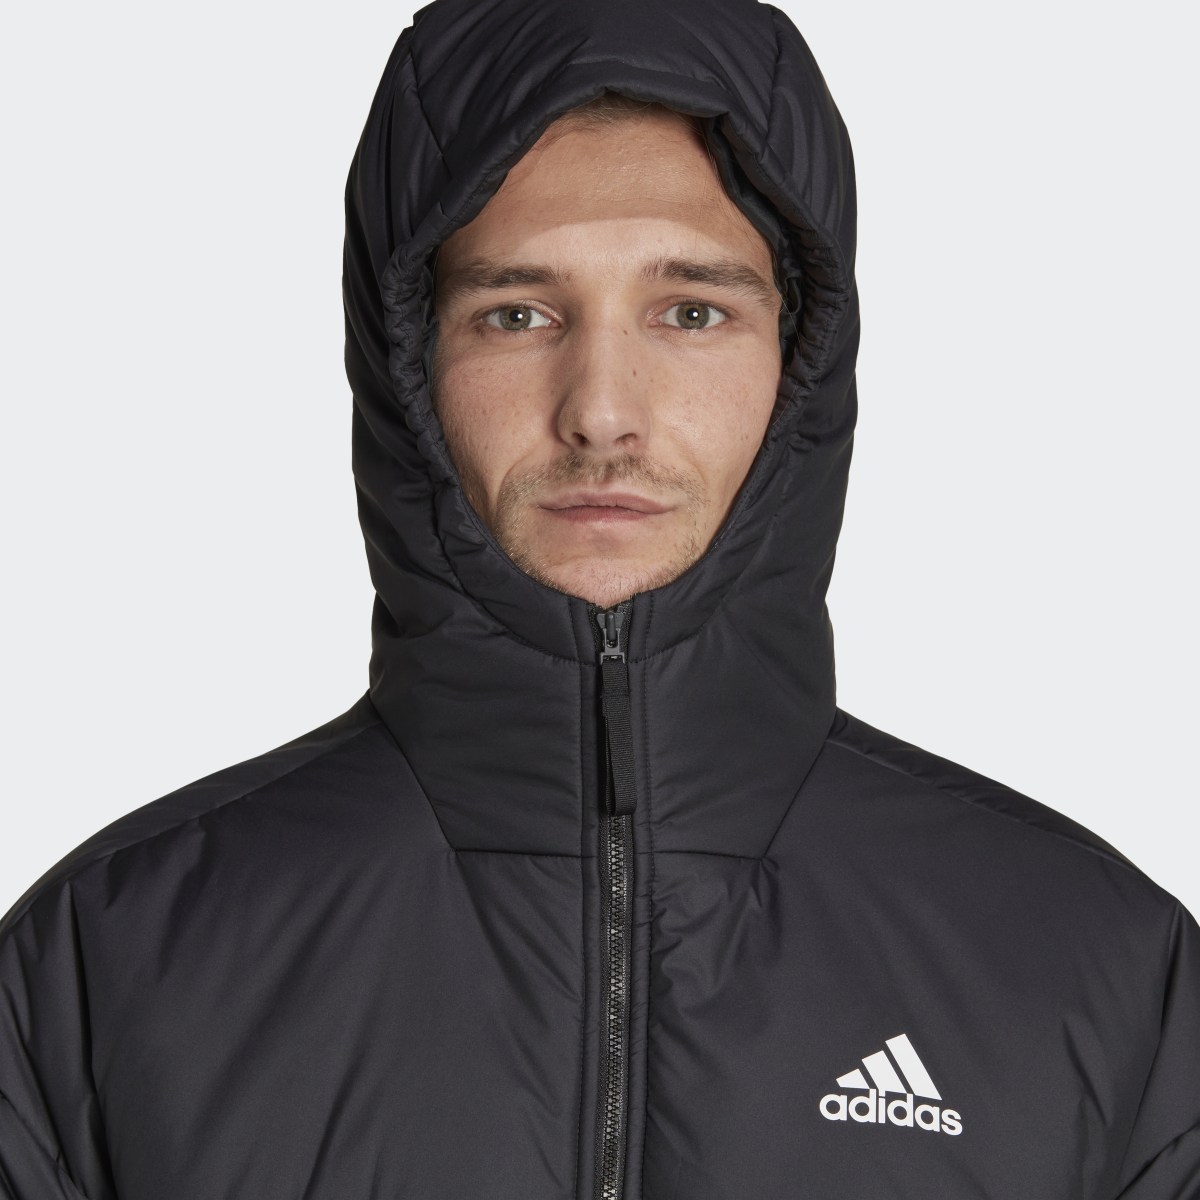 Adidas BSC 3-Stripes Puffy Hooded Jacket. 8